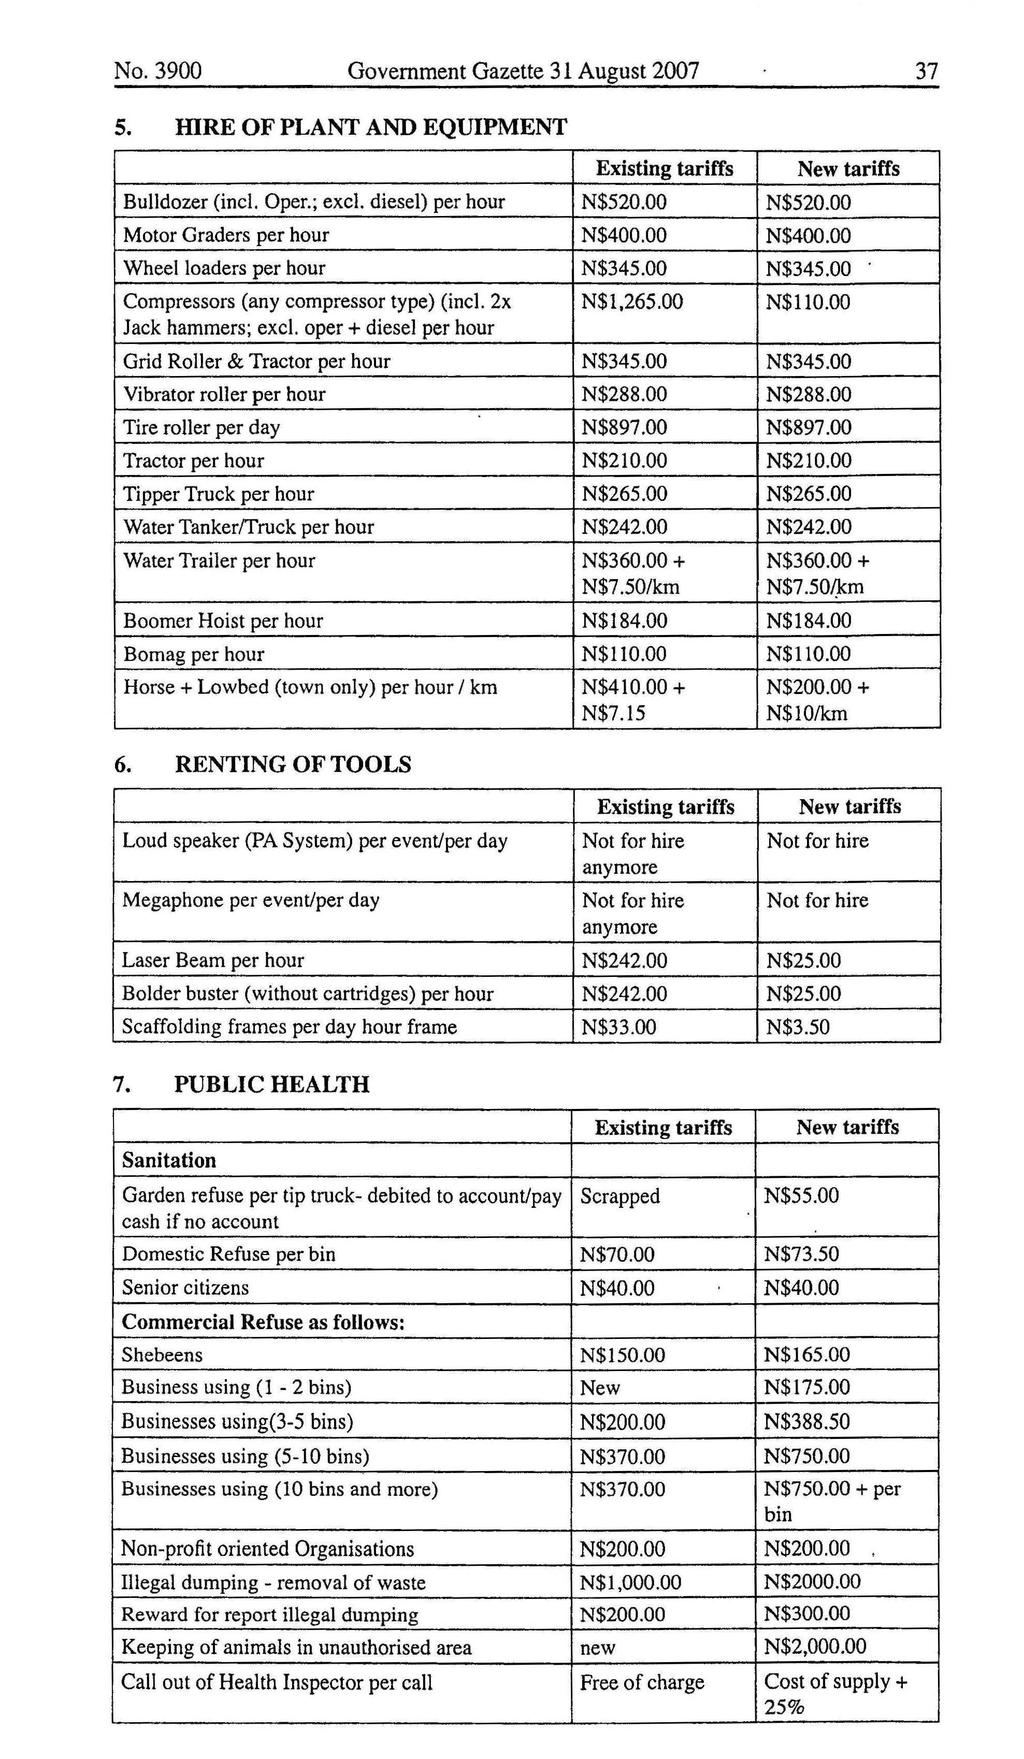 No. 3900 Government Gazette 31 August 2007 37 5. IDRE OF PLANT AND EQUIPMENT Existing tariffs New tariffs Bulldozer (incl. Oper.; excl. diesel) per hour N$520.00 N$520.00 Motor Graders per hour N$400.